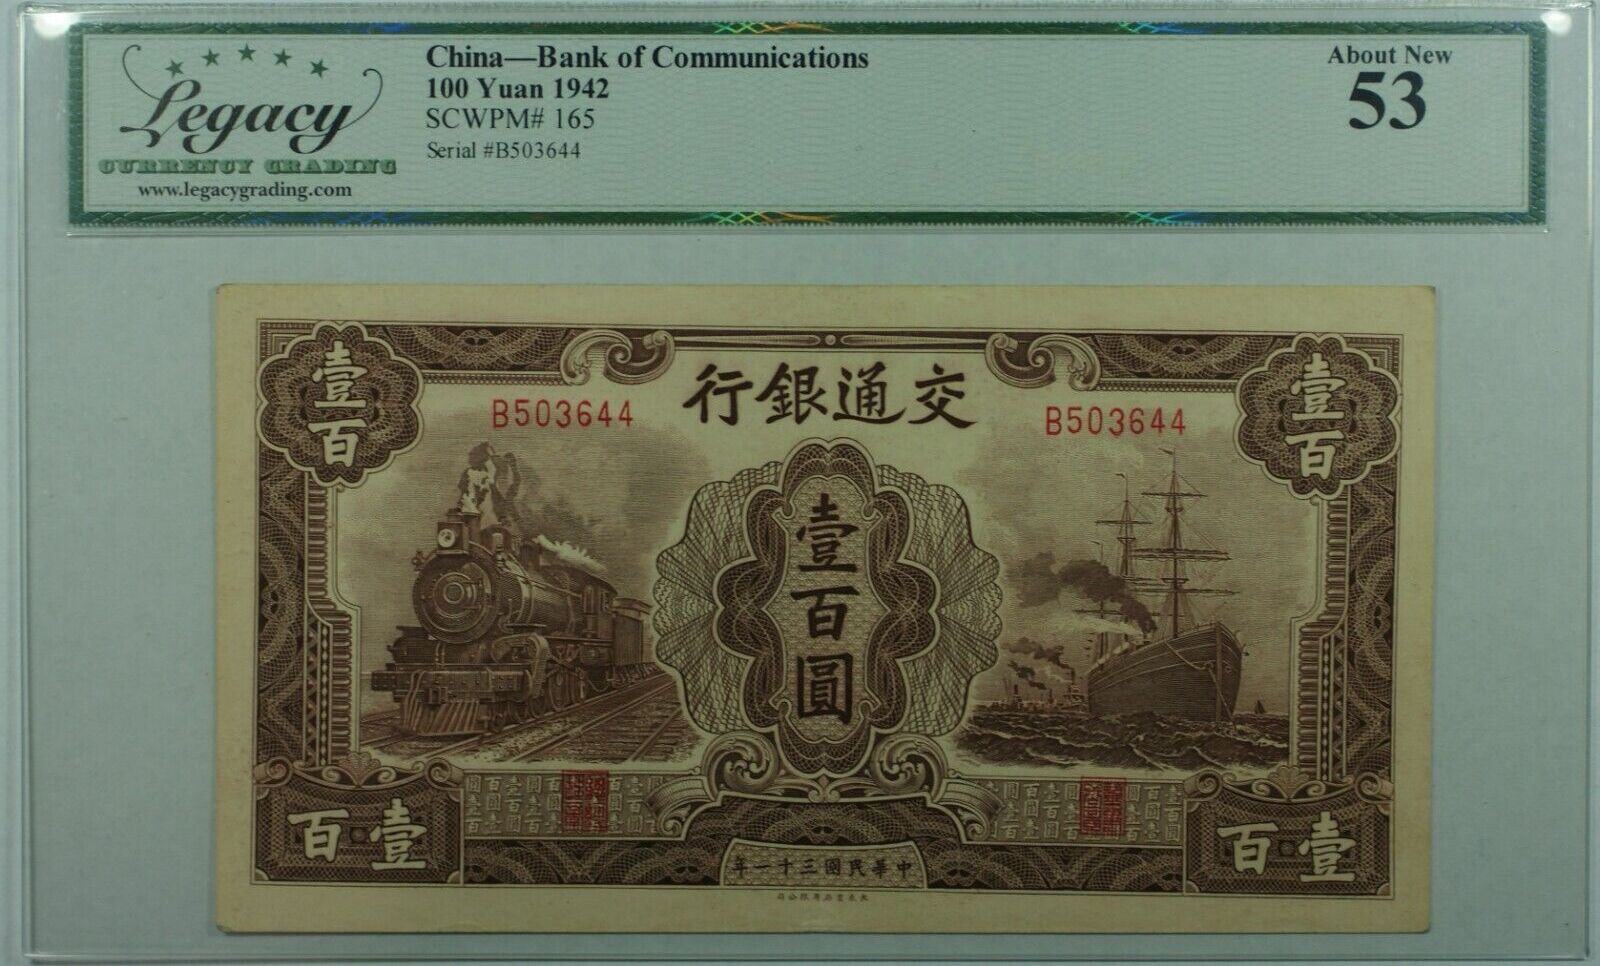 Banknoten 1942 China--Bank of Communications 100 Yuan Note SCWPM#165 Legacy  About New 53 | MA-Shops